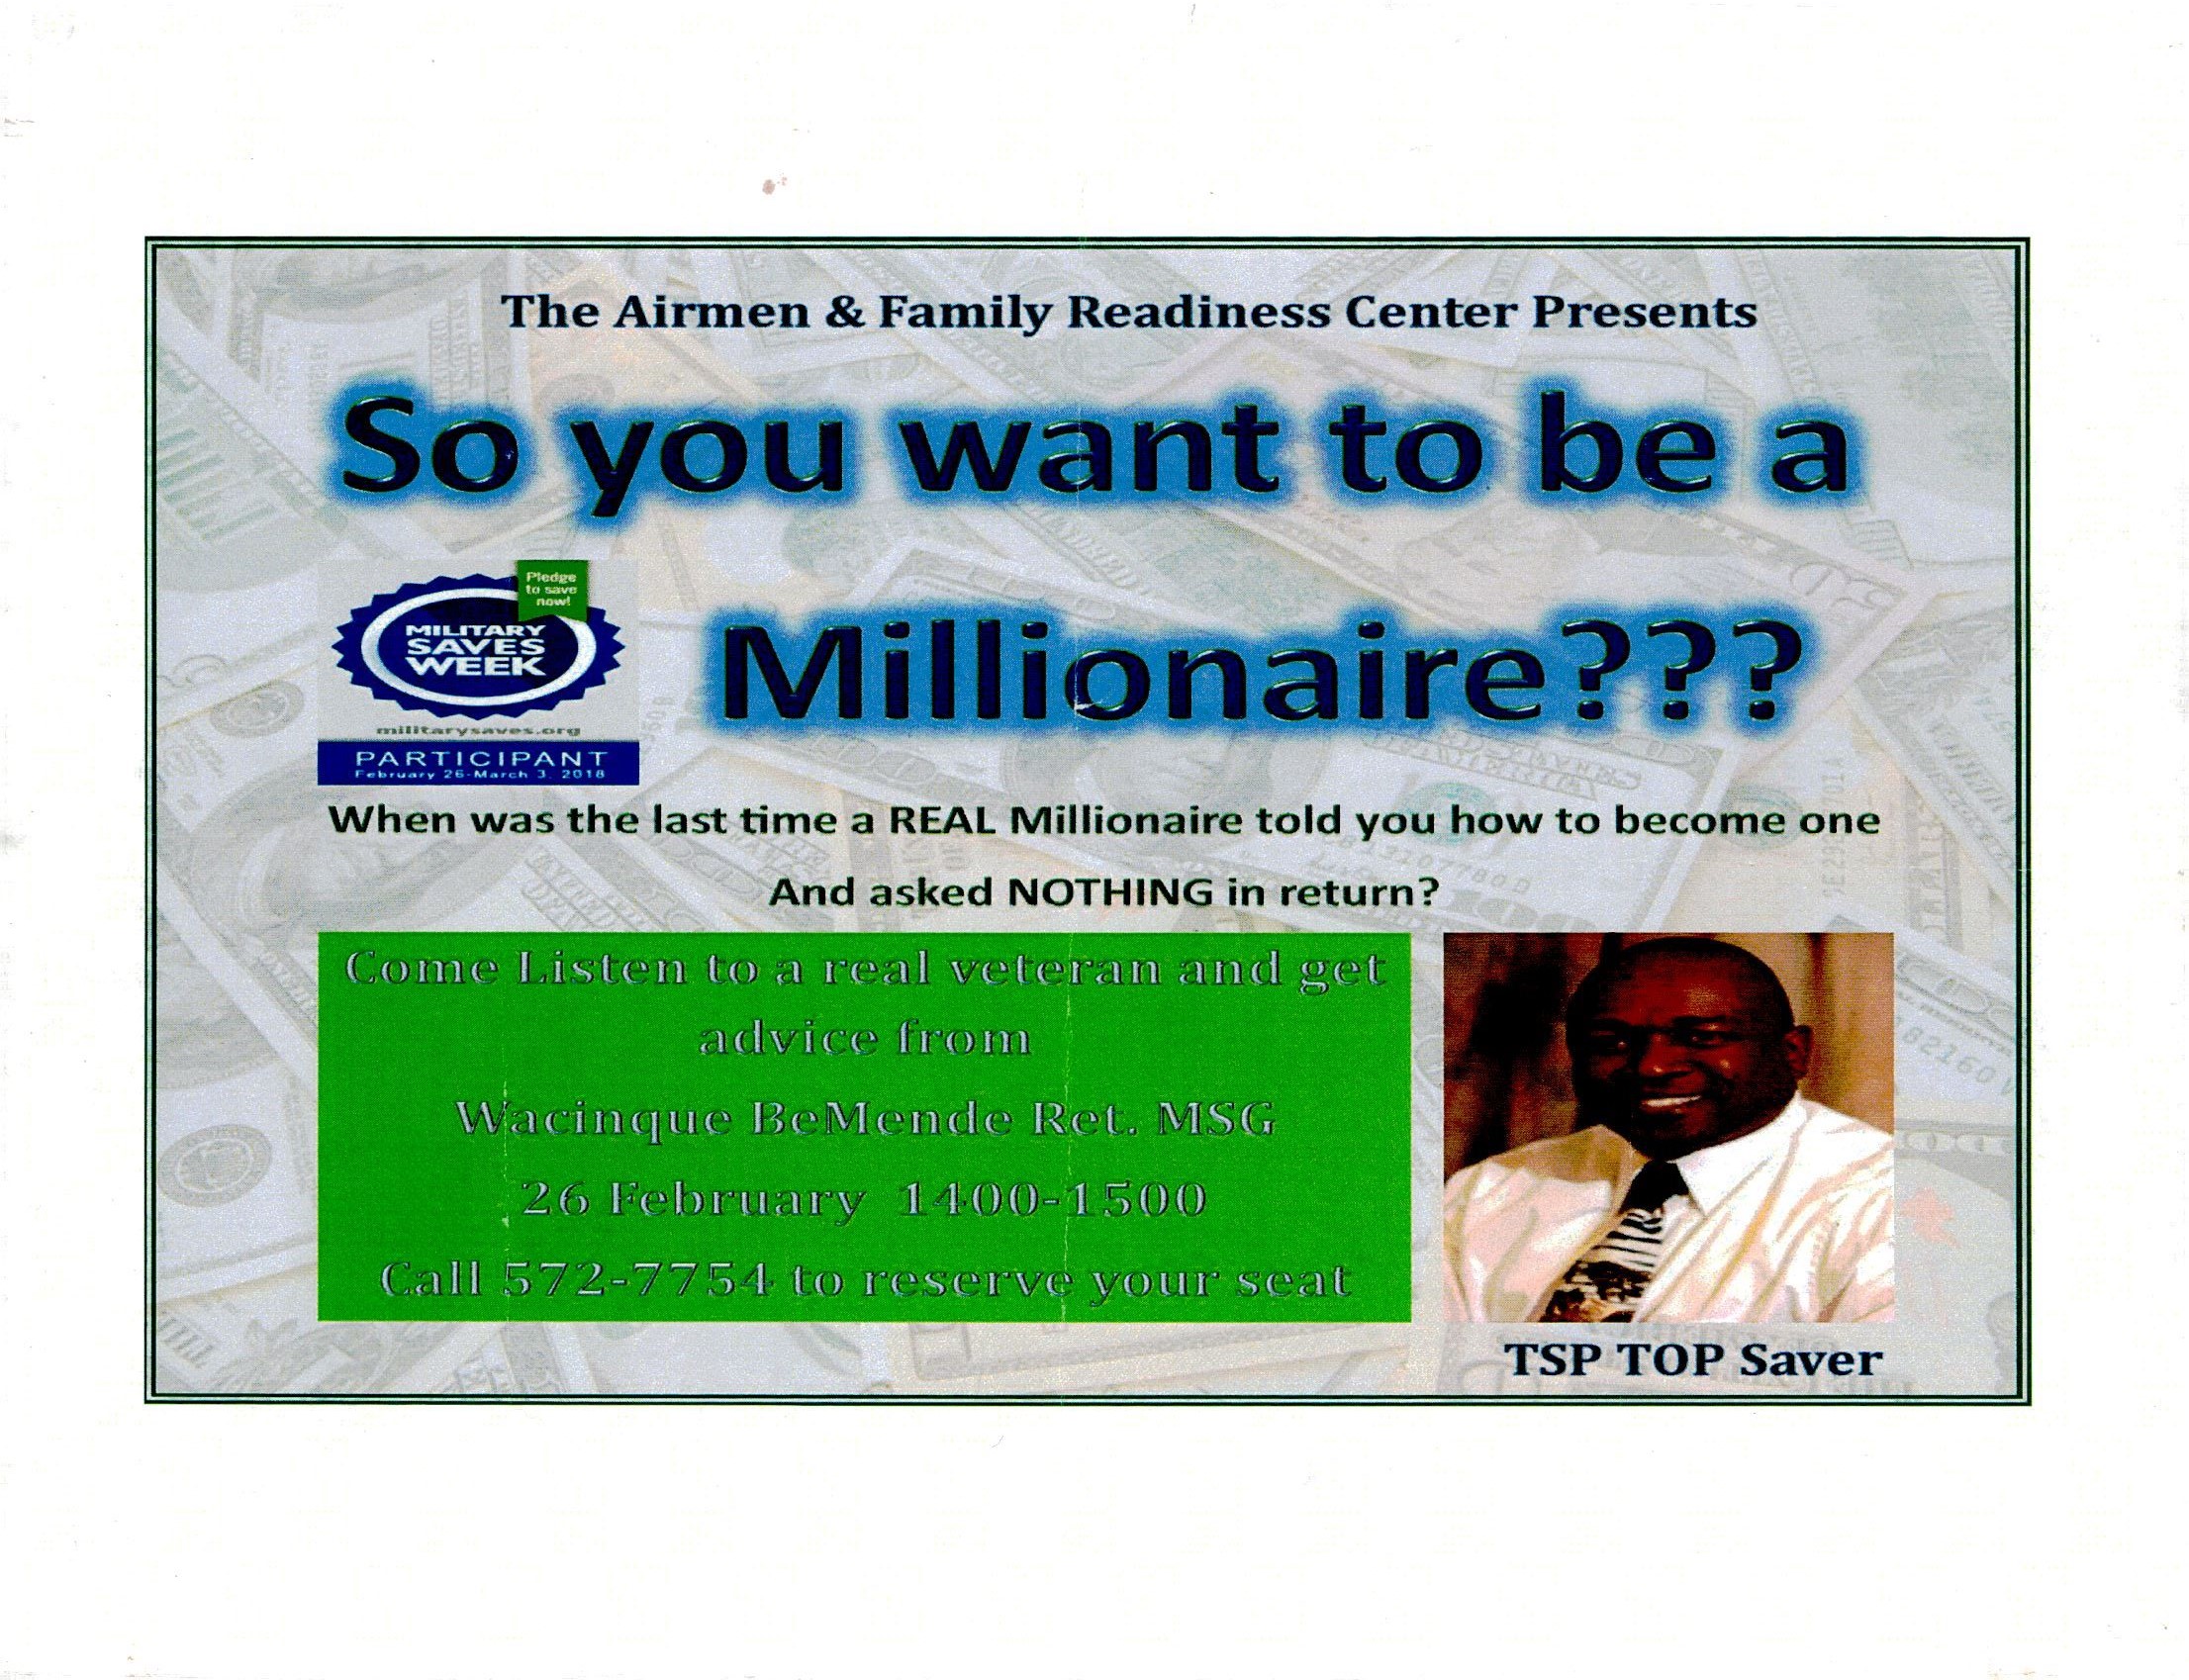 Wacinque on a flyer that advertises his seminar on how to become a millionaire